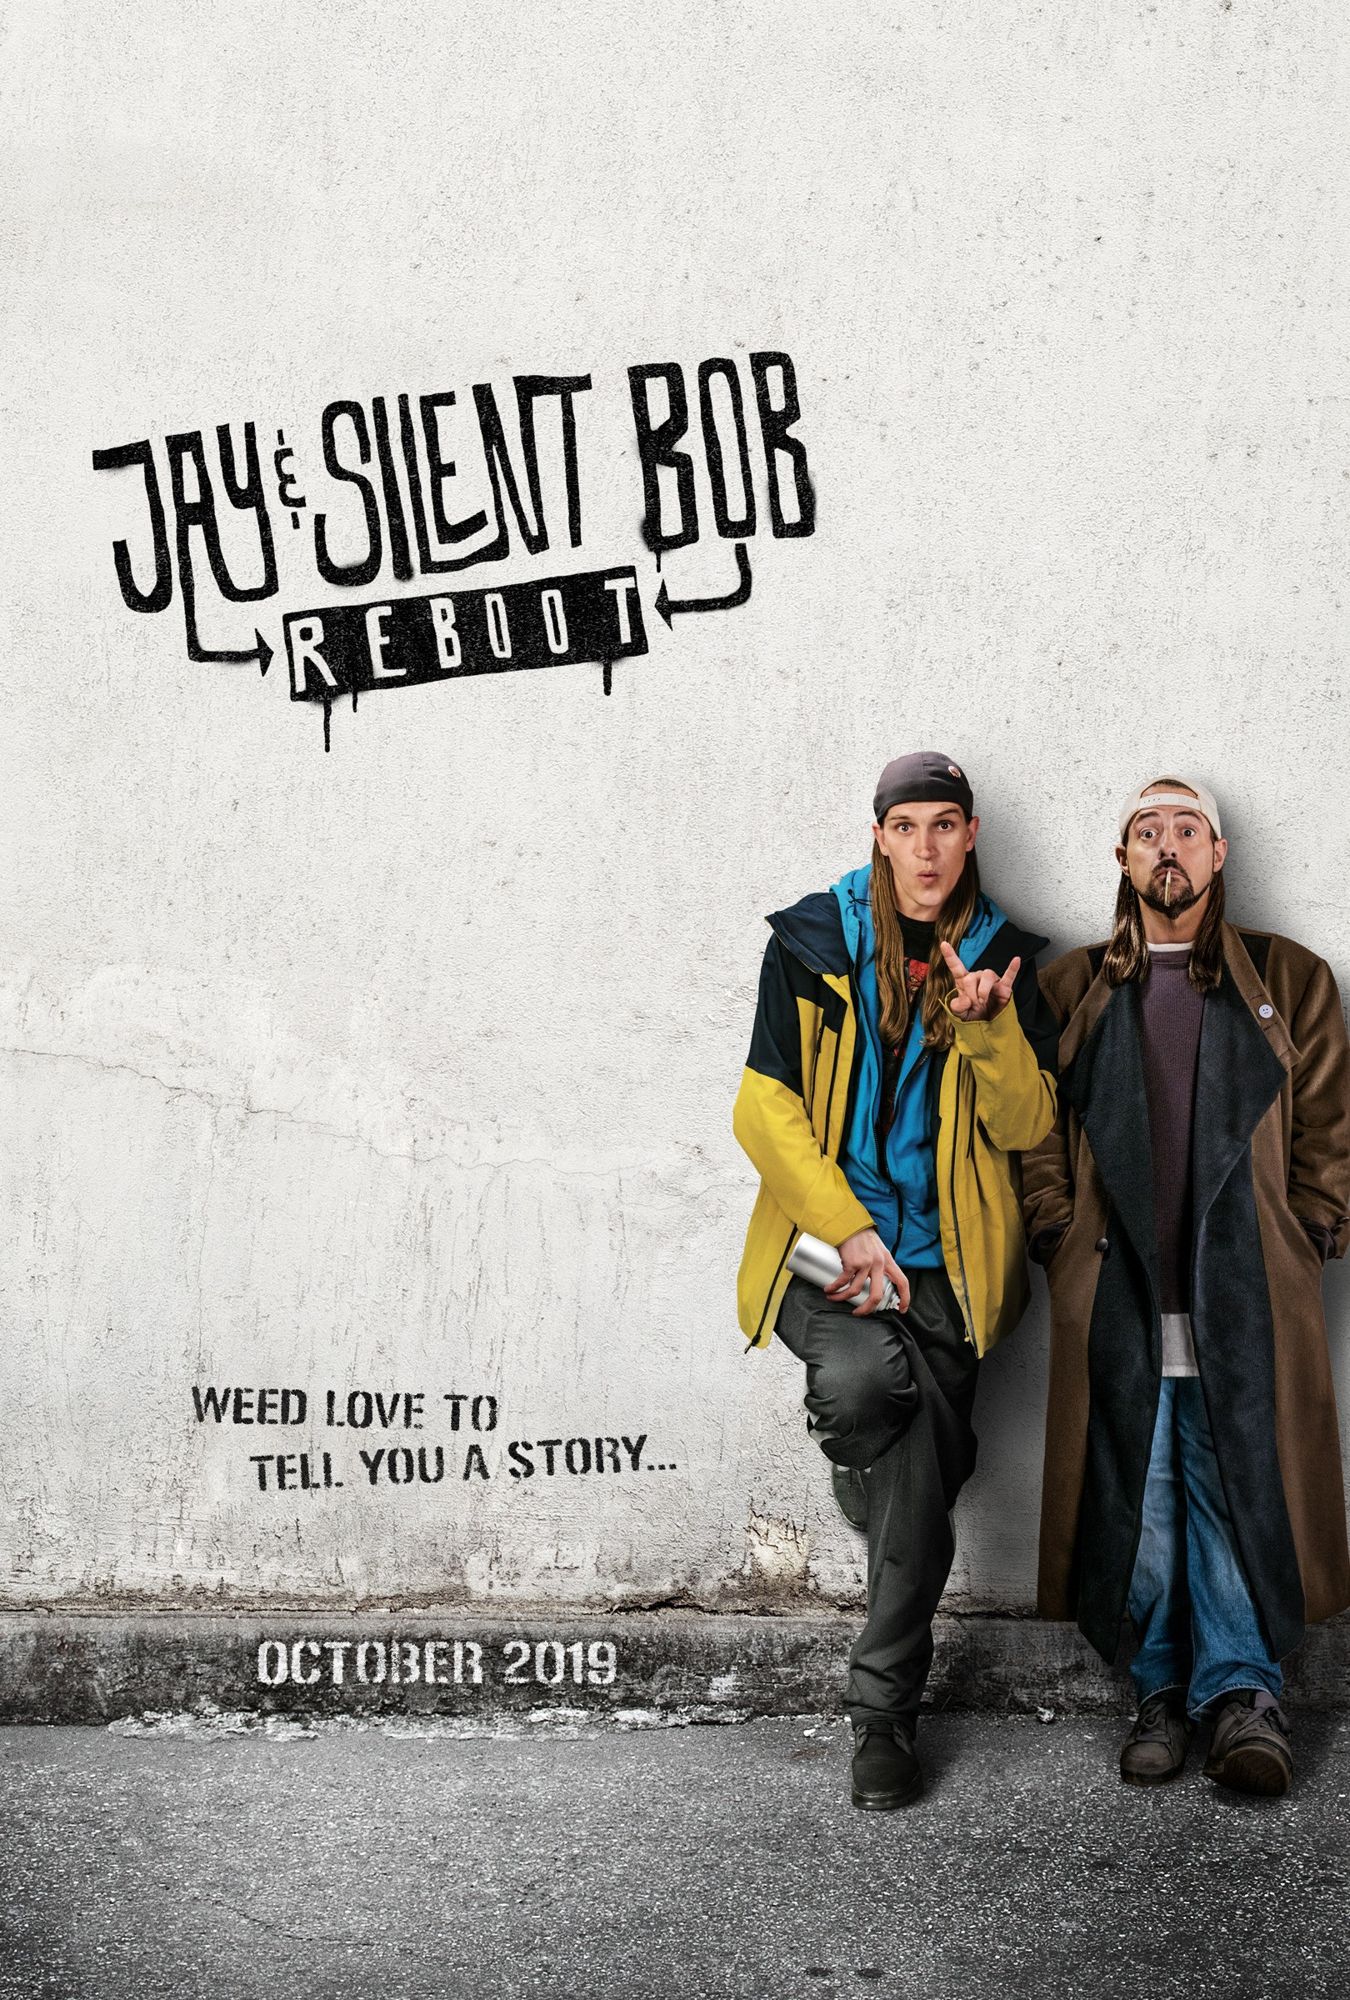 Jay and Silent Bob Reboot (2019) Pictures, Trailer, Reviews, News, DVD and Soundtrack1350 x 2000